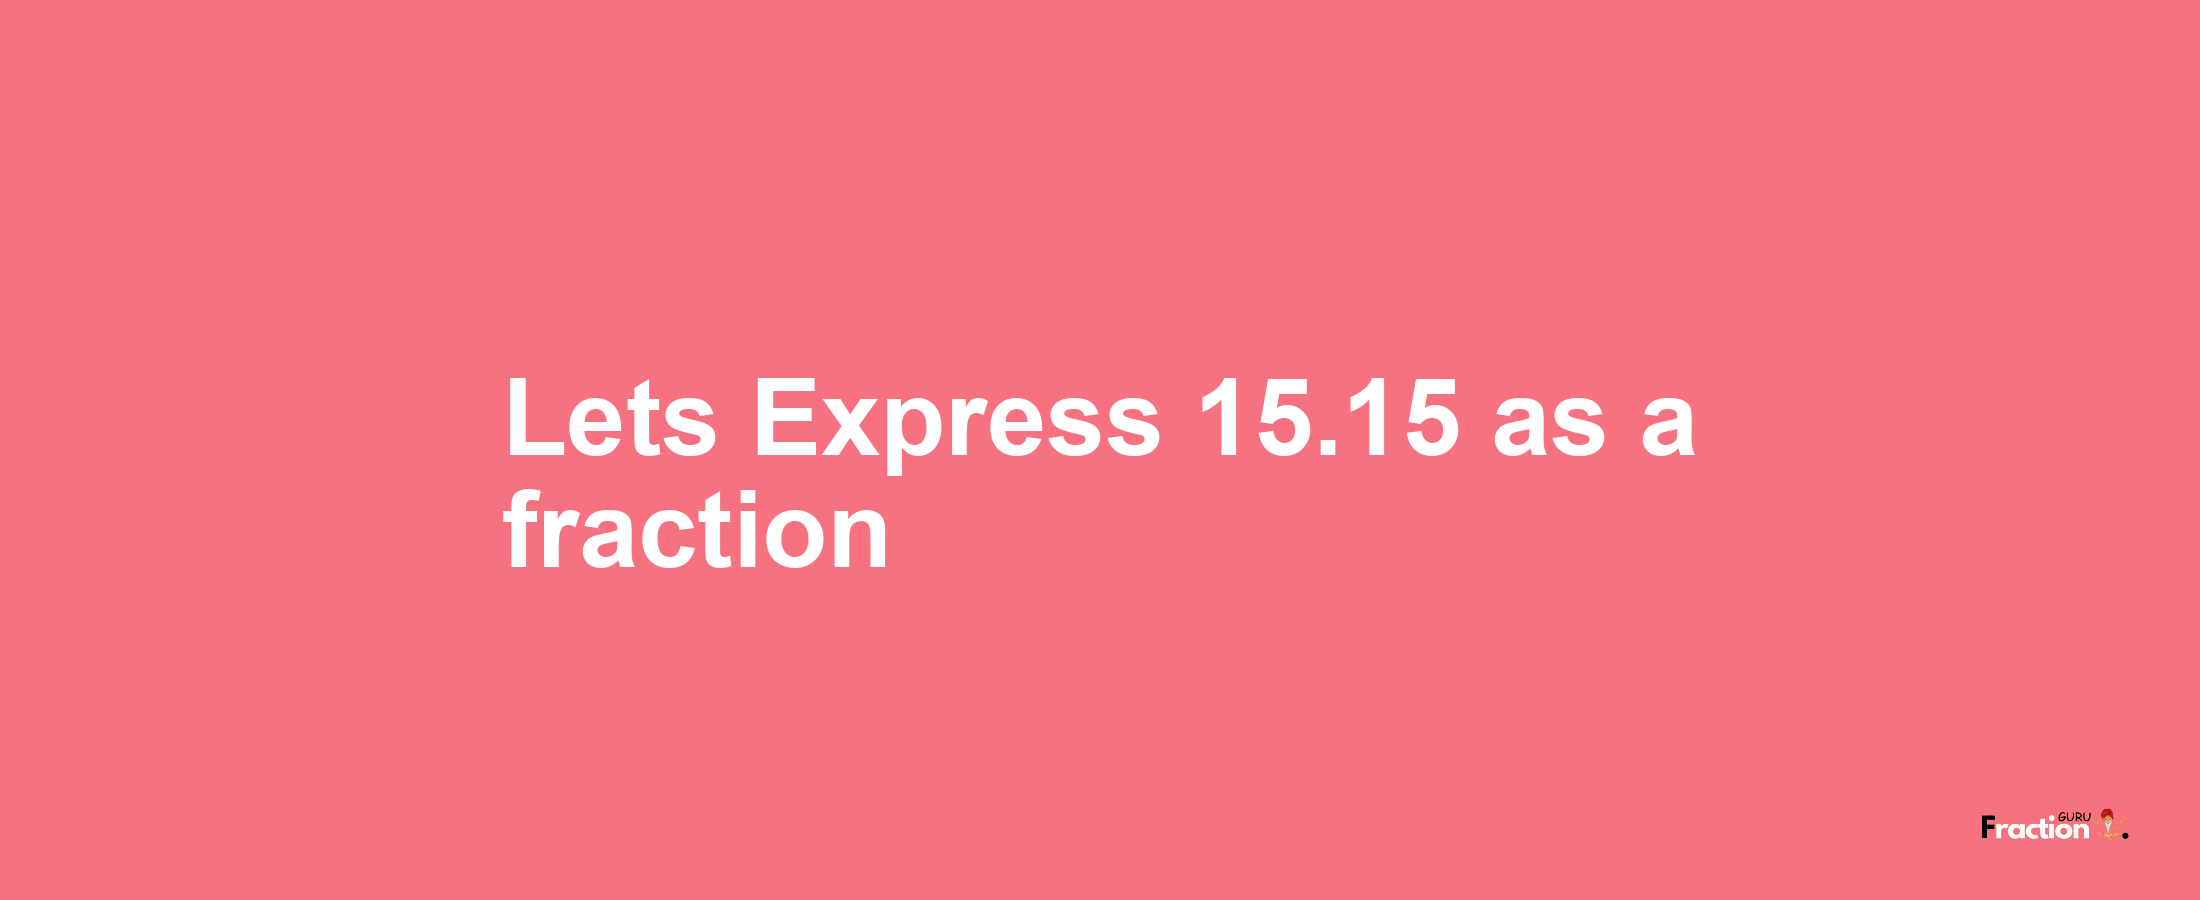 Lets Express 15.15 as afraction